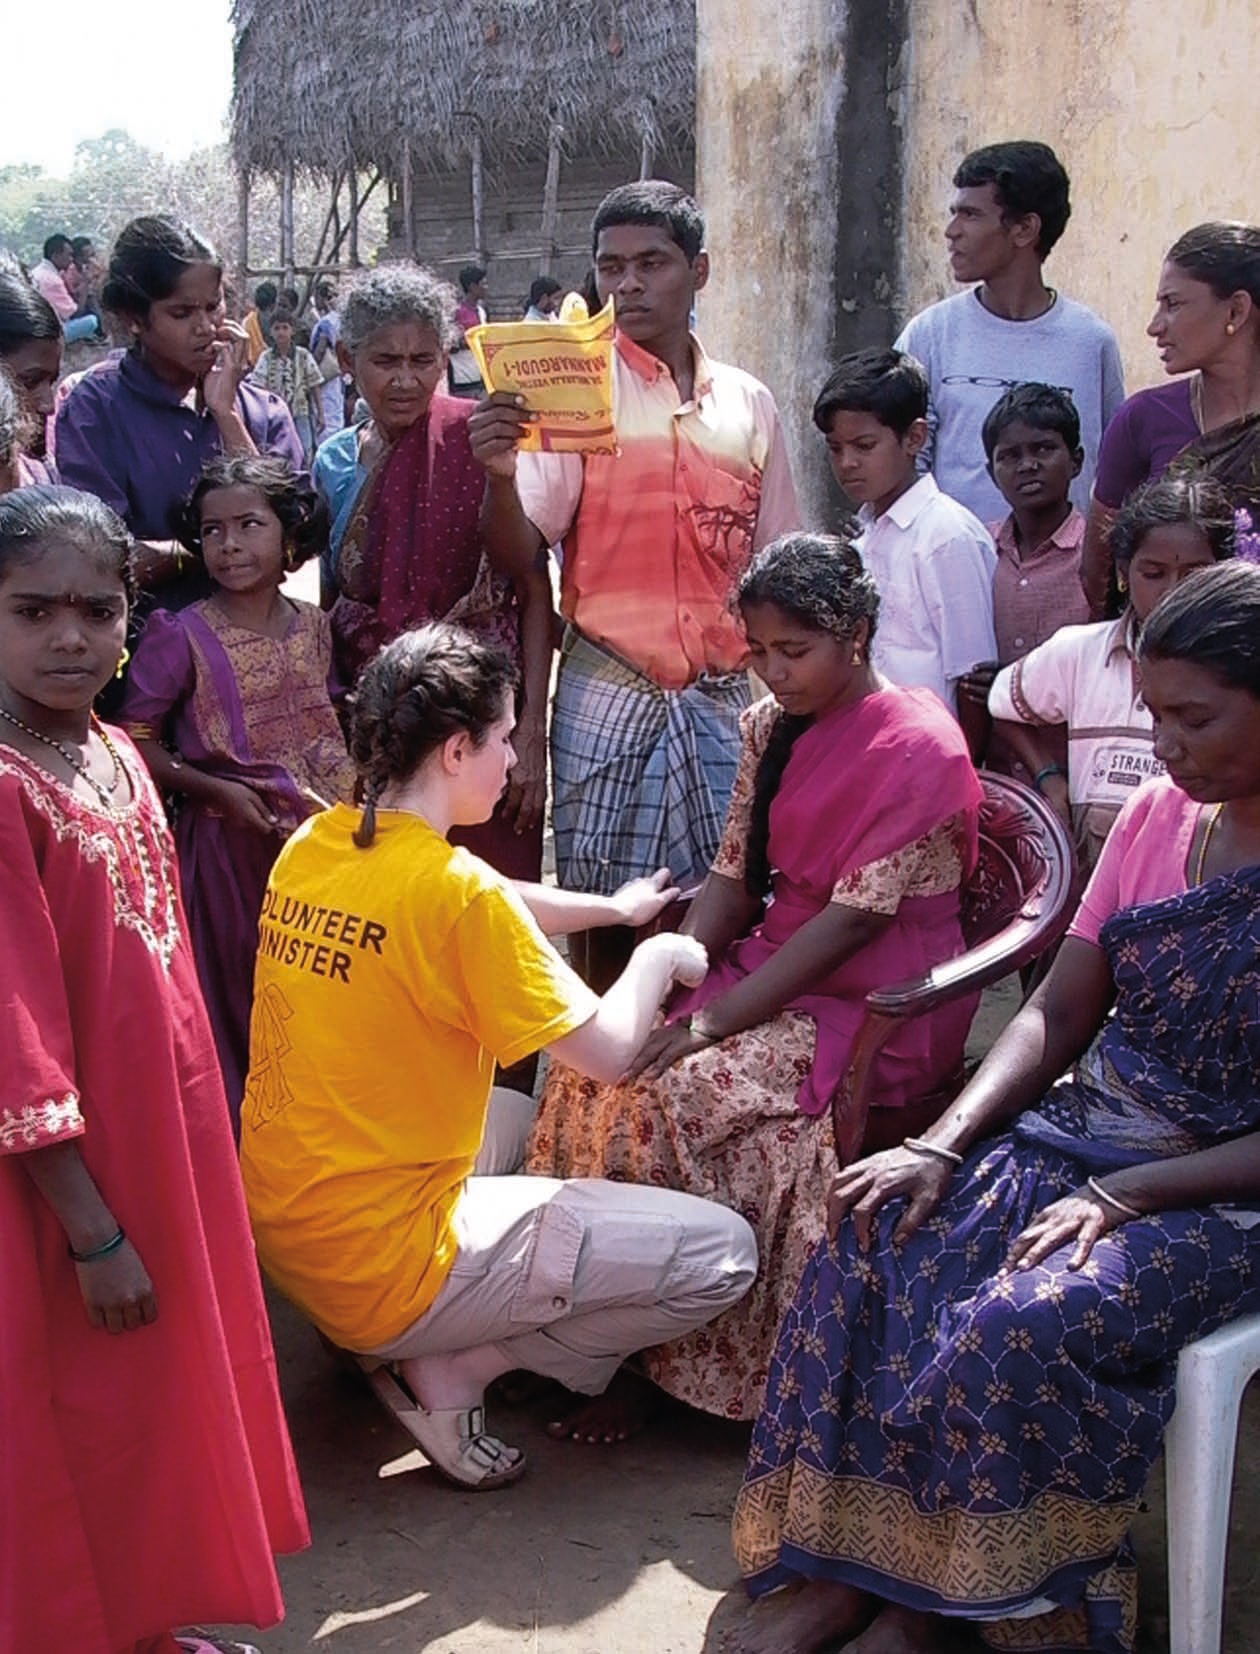 Hundreds of Volunteer Ministers traveled to South Asia to respond to the 2004 tsunami.